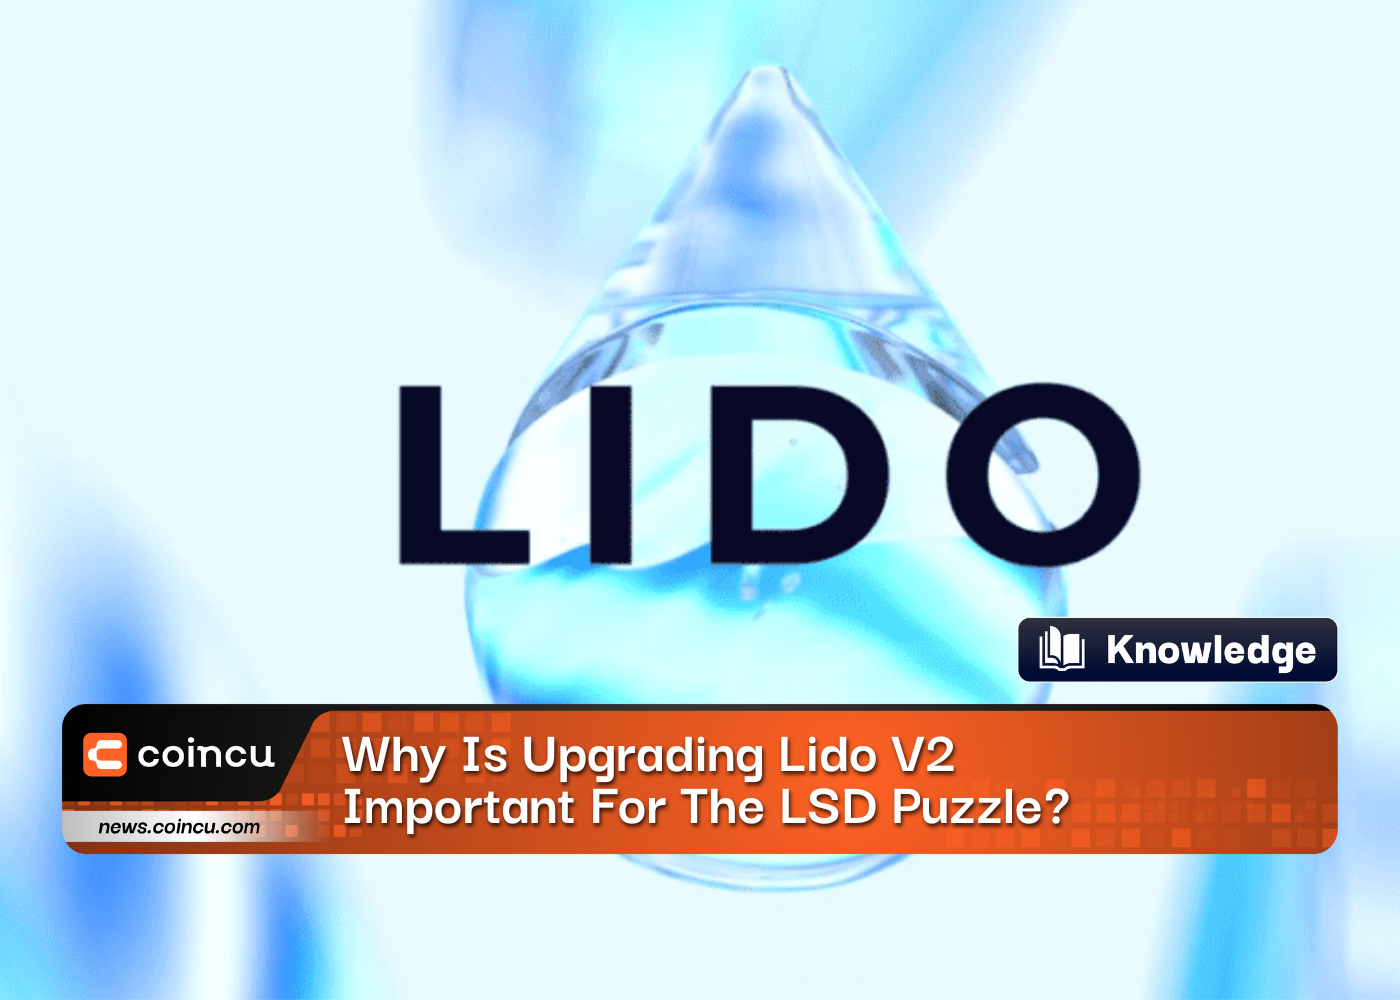 Why Is Upgrading Lido V2 Important For The LSD Puzzle?